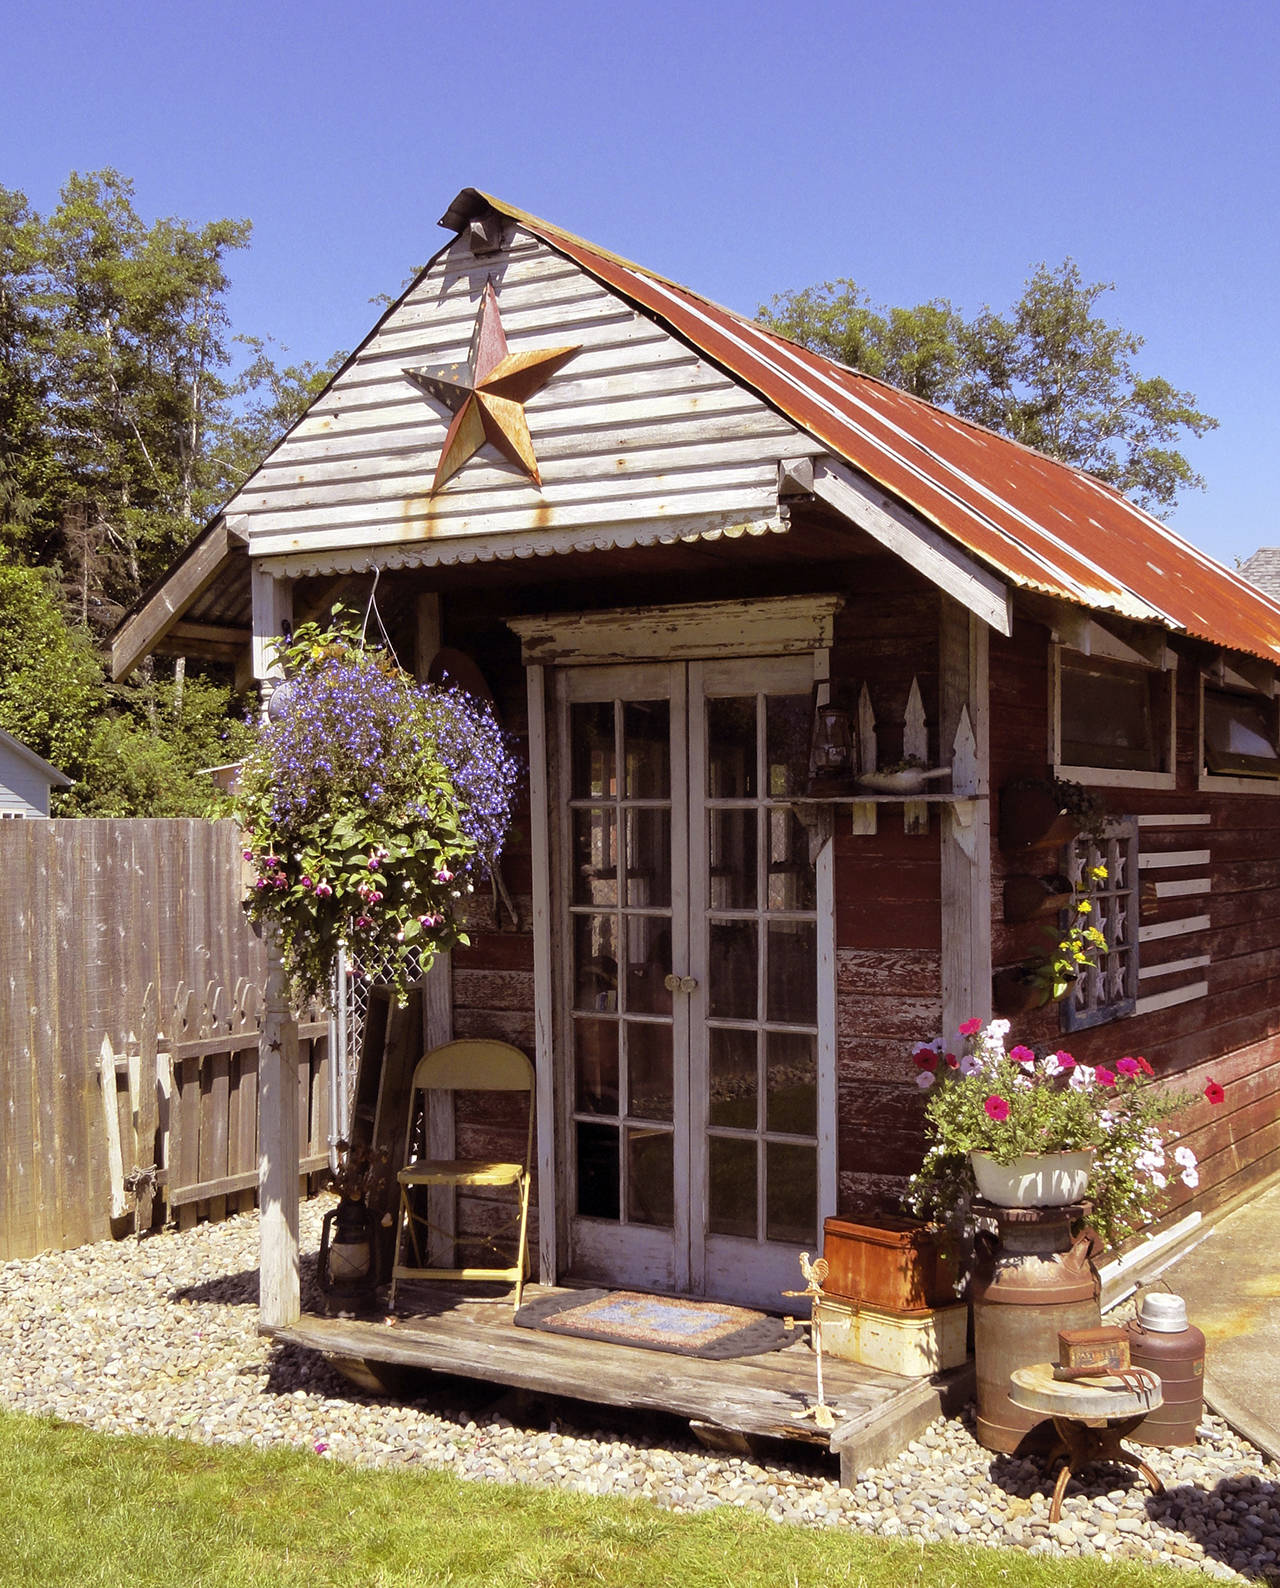 Many gardeners have a potting shed for both indoor and outdoor plants. This shed was featured in a garden tour in Grays Harbor County several years ago. (Mary Shane)